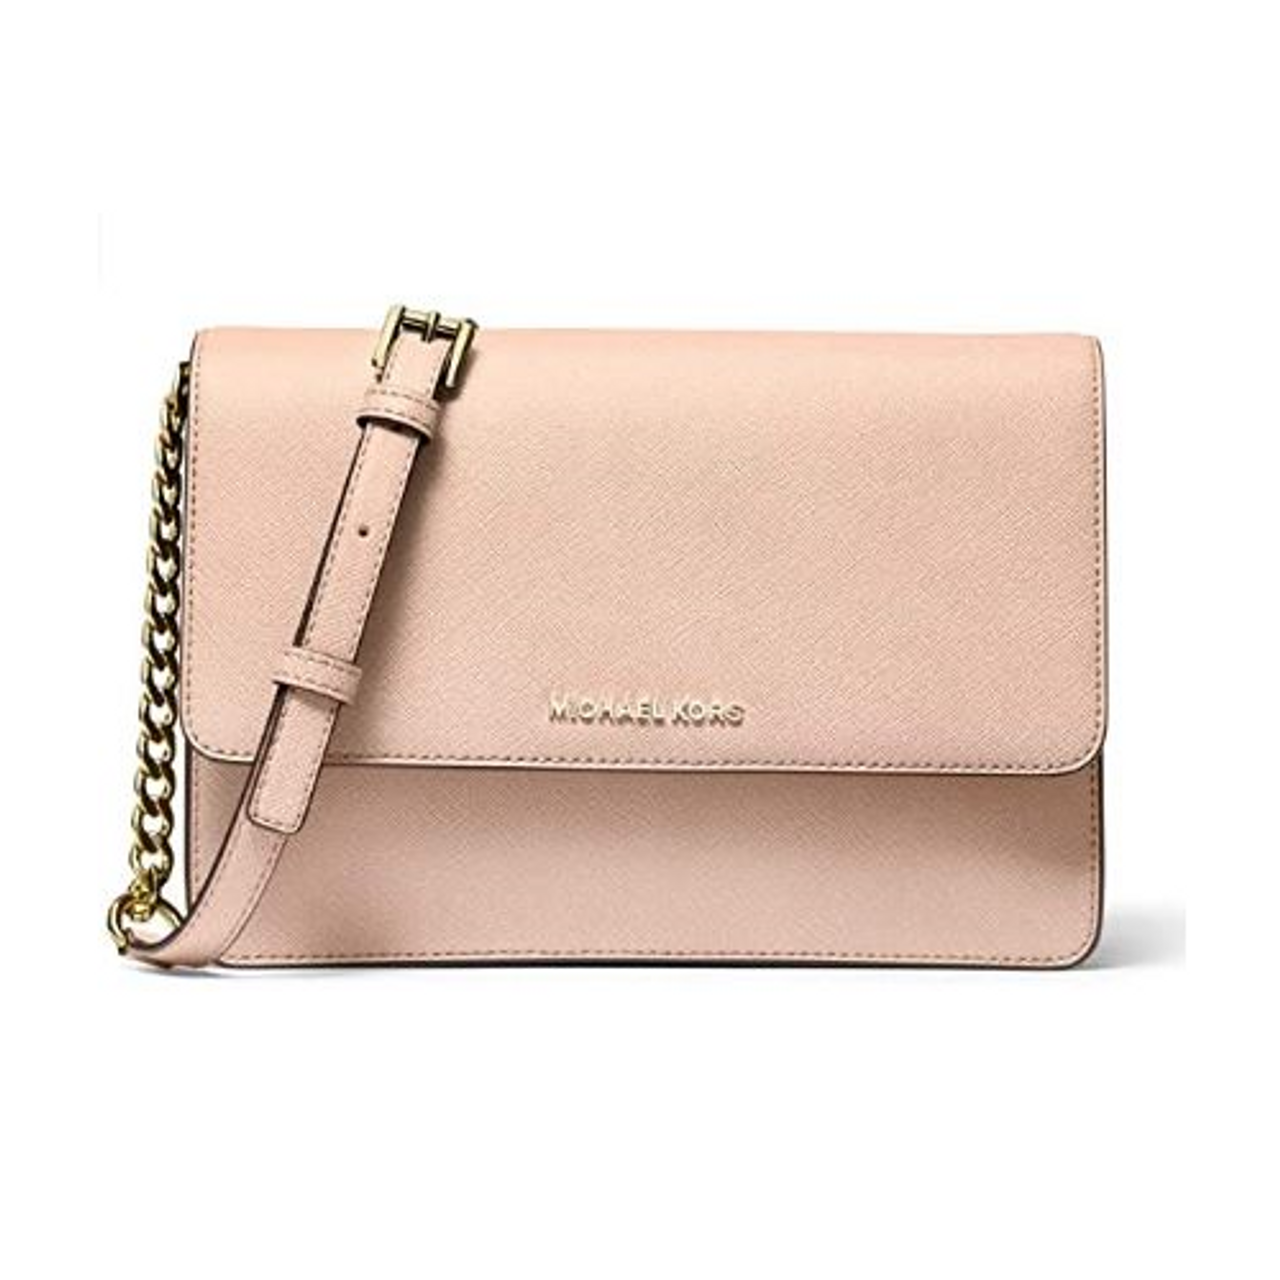 Amazoncom Michael Kors Jet Set East West Chain Crossbody Vanilla MK  Powder Blush Pink Bundled with Card Holder in Ballet  Clothing Shoes   Jewelry